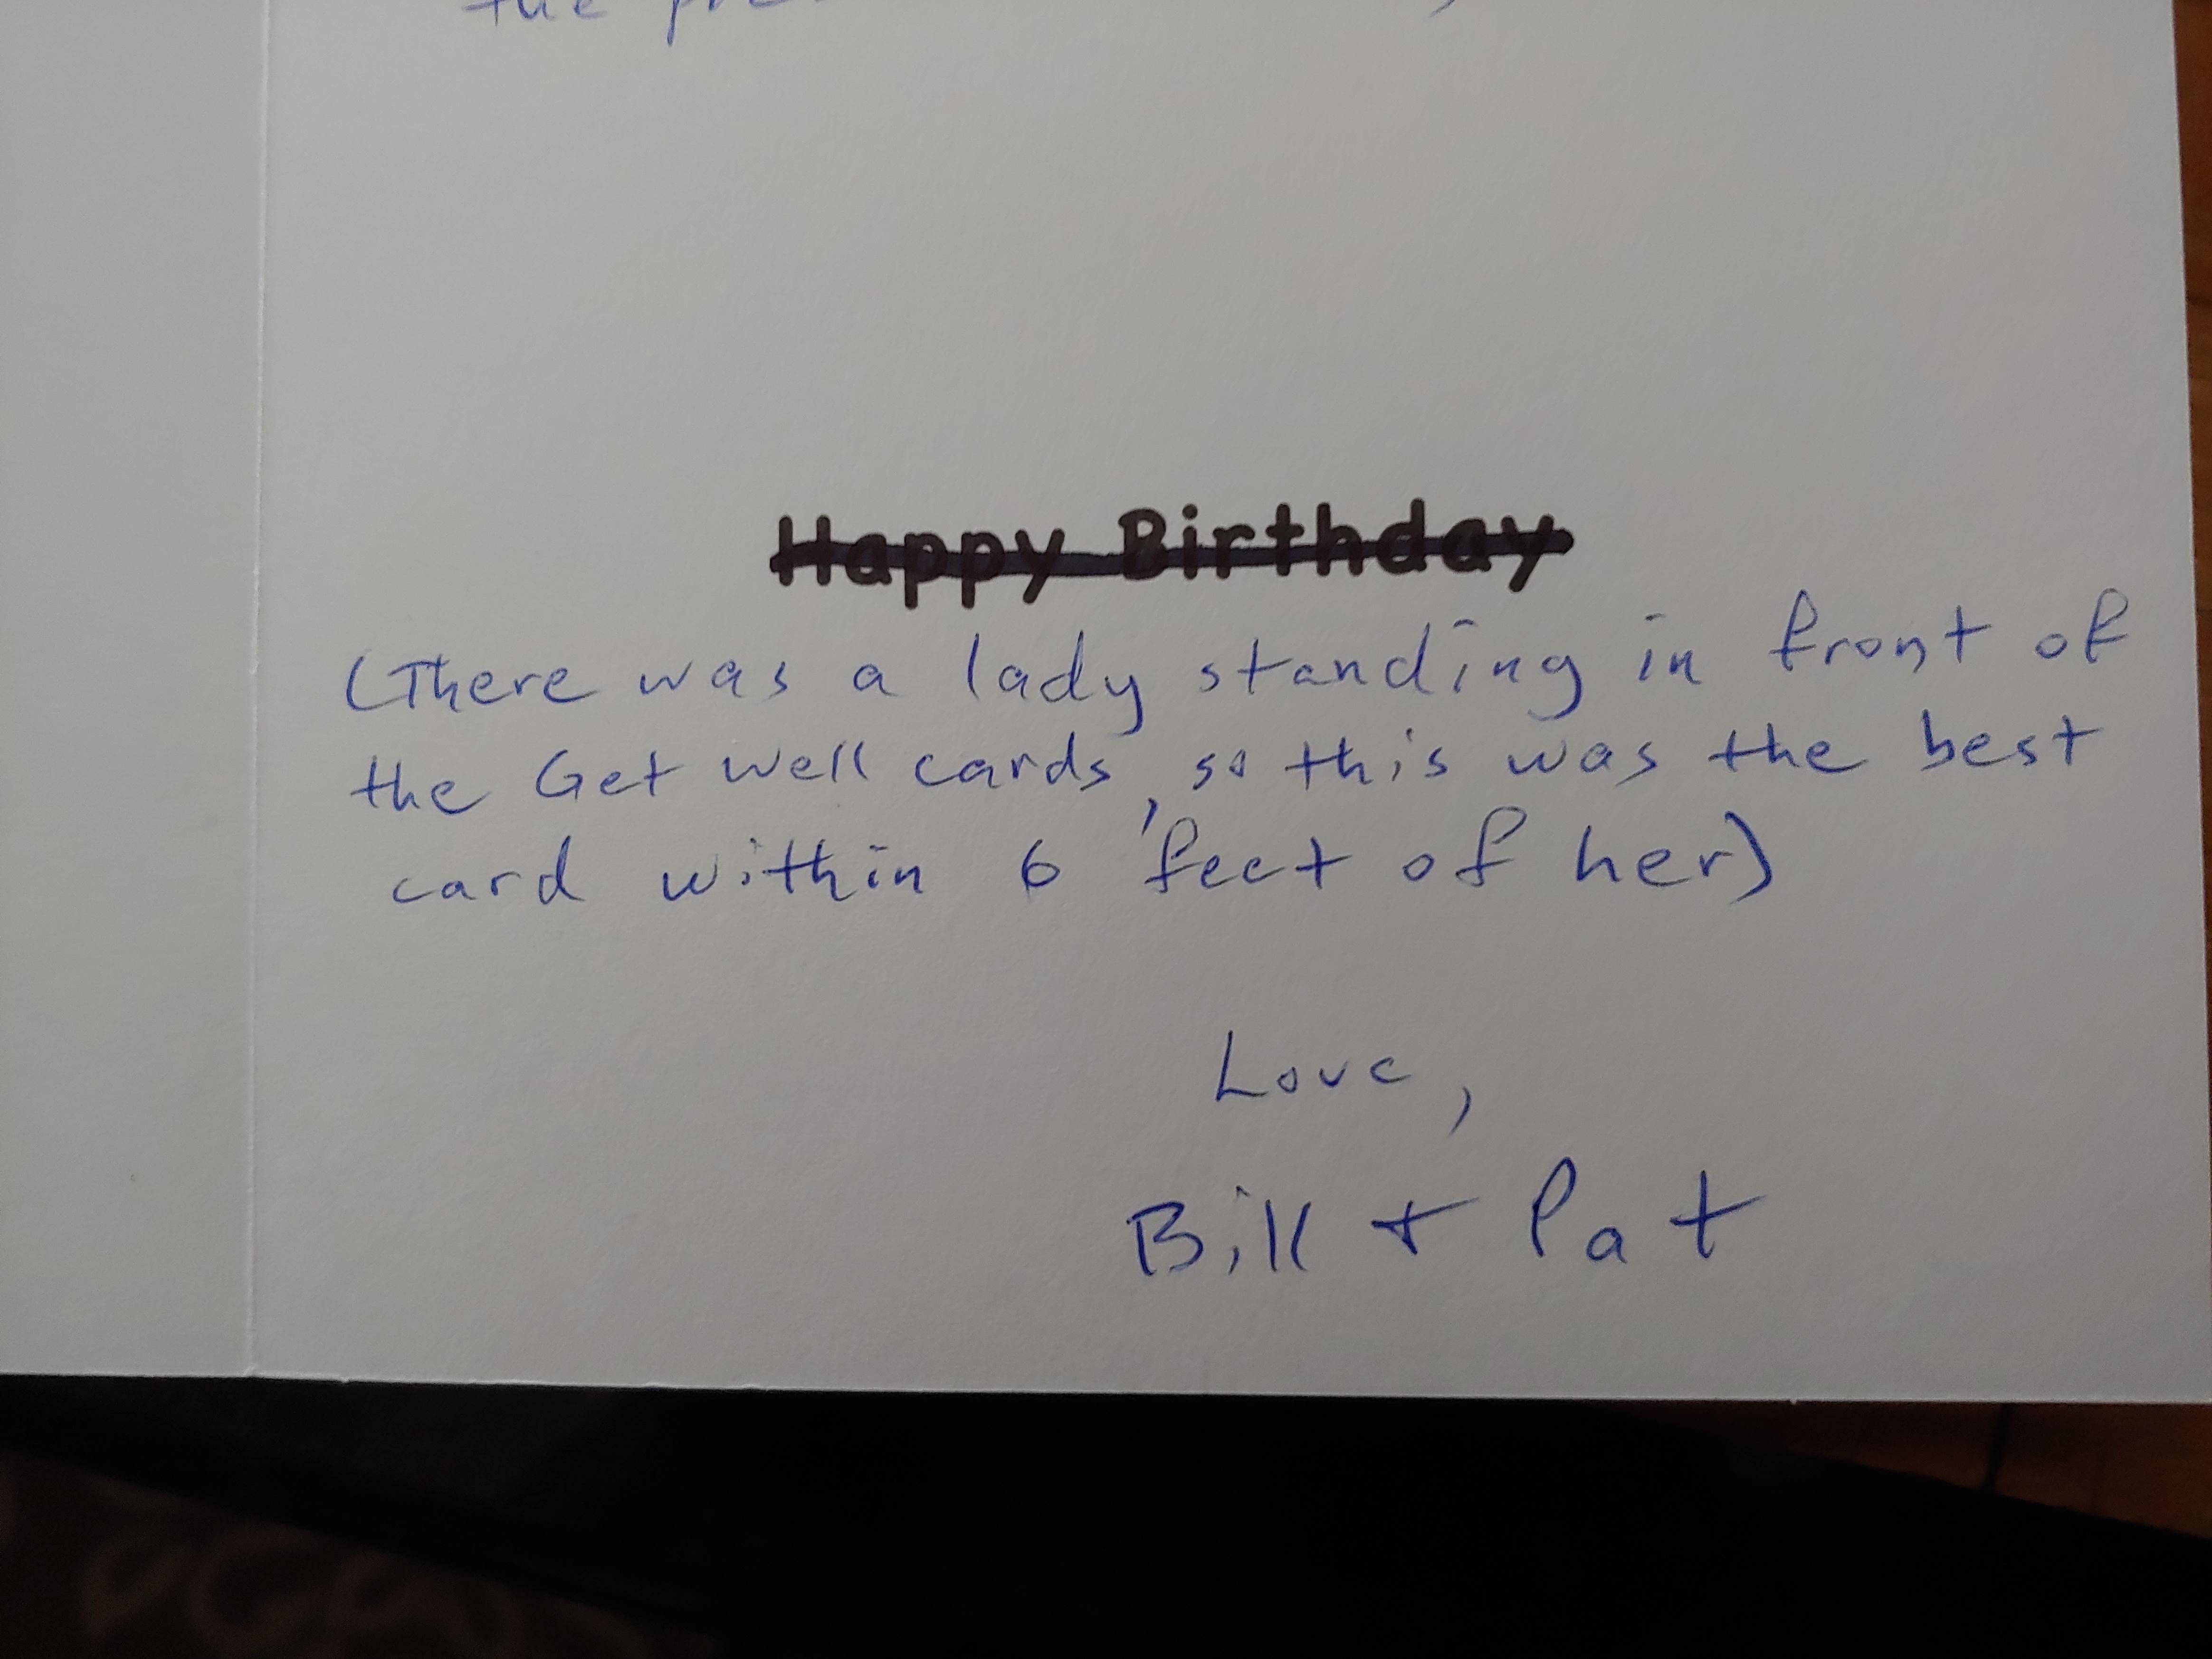 A family member of mine was hospitalised recently and received a get-well-card from friends.